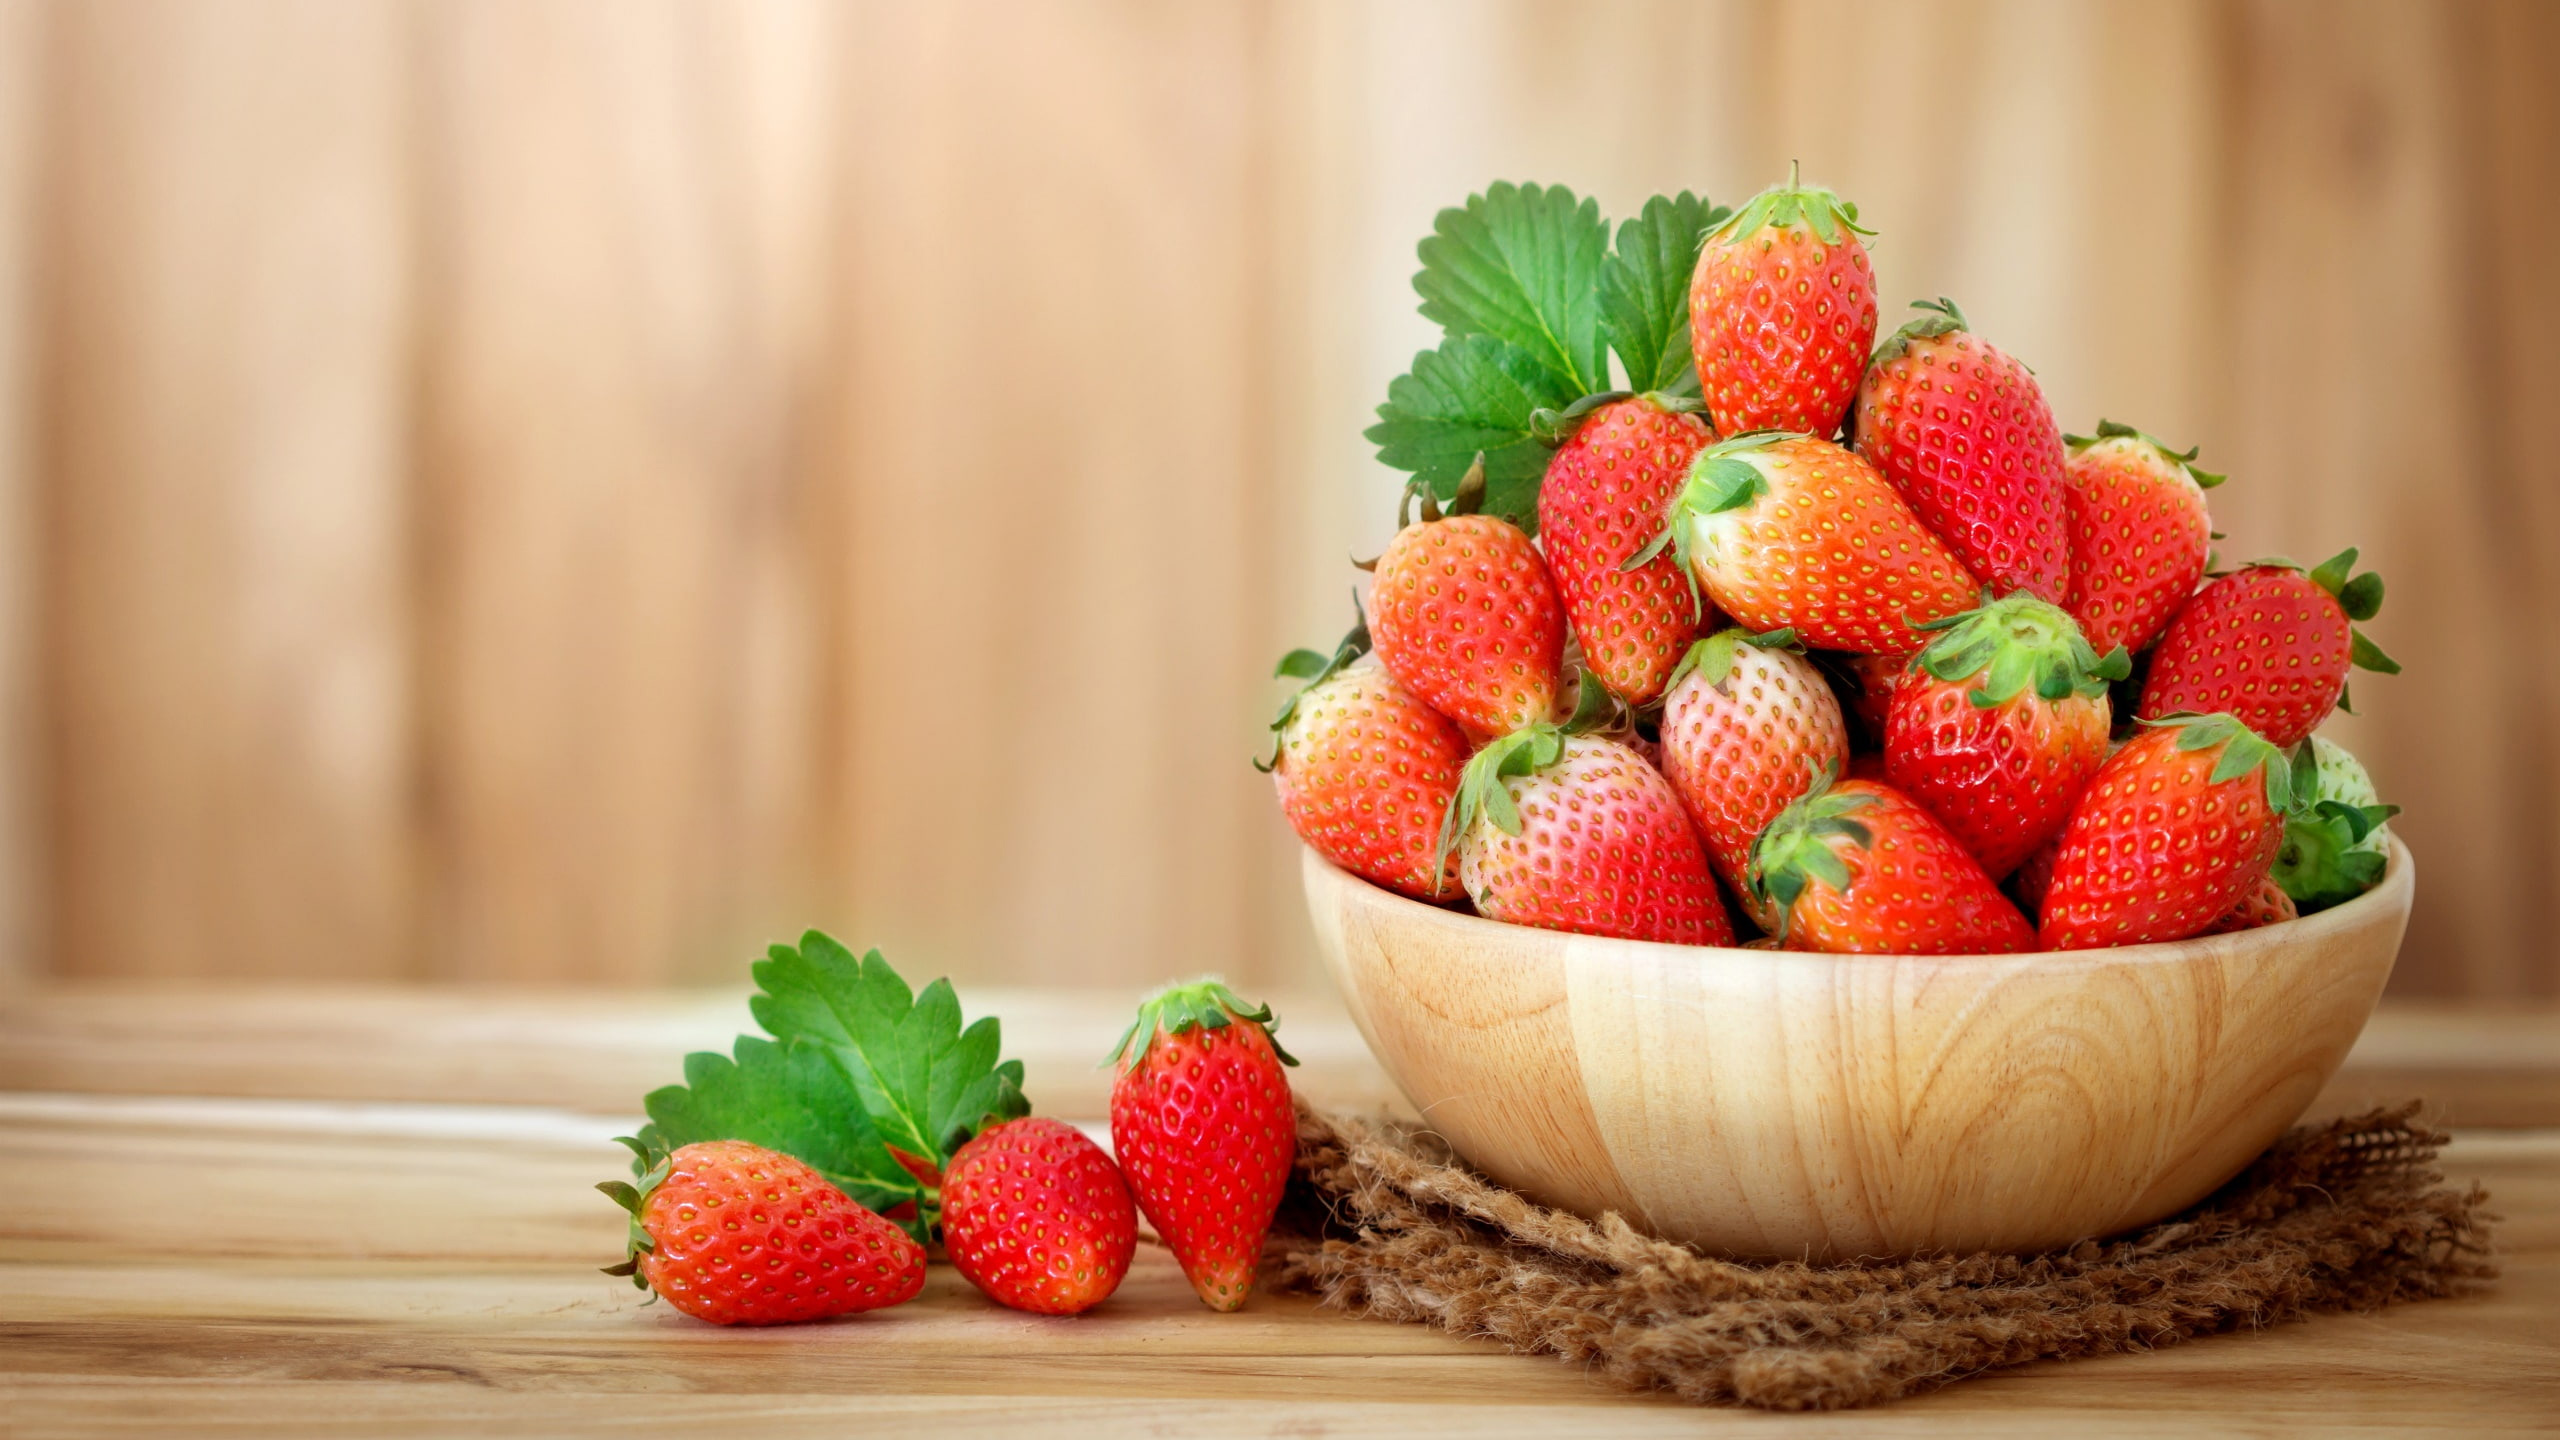 Strawberries With Green Leaves In Bowl HD Strawberry